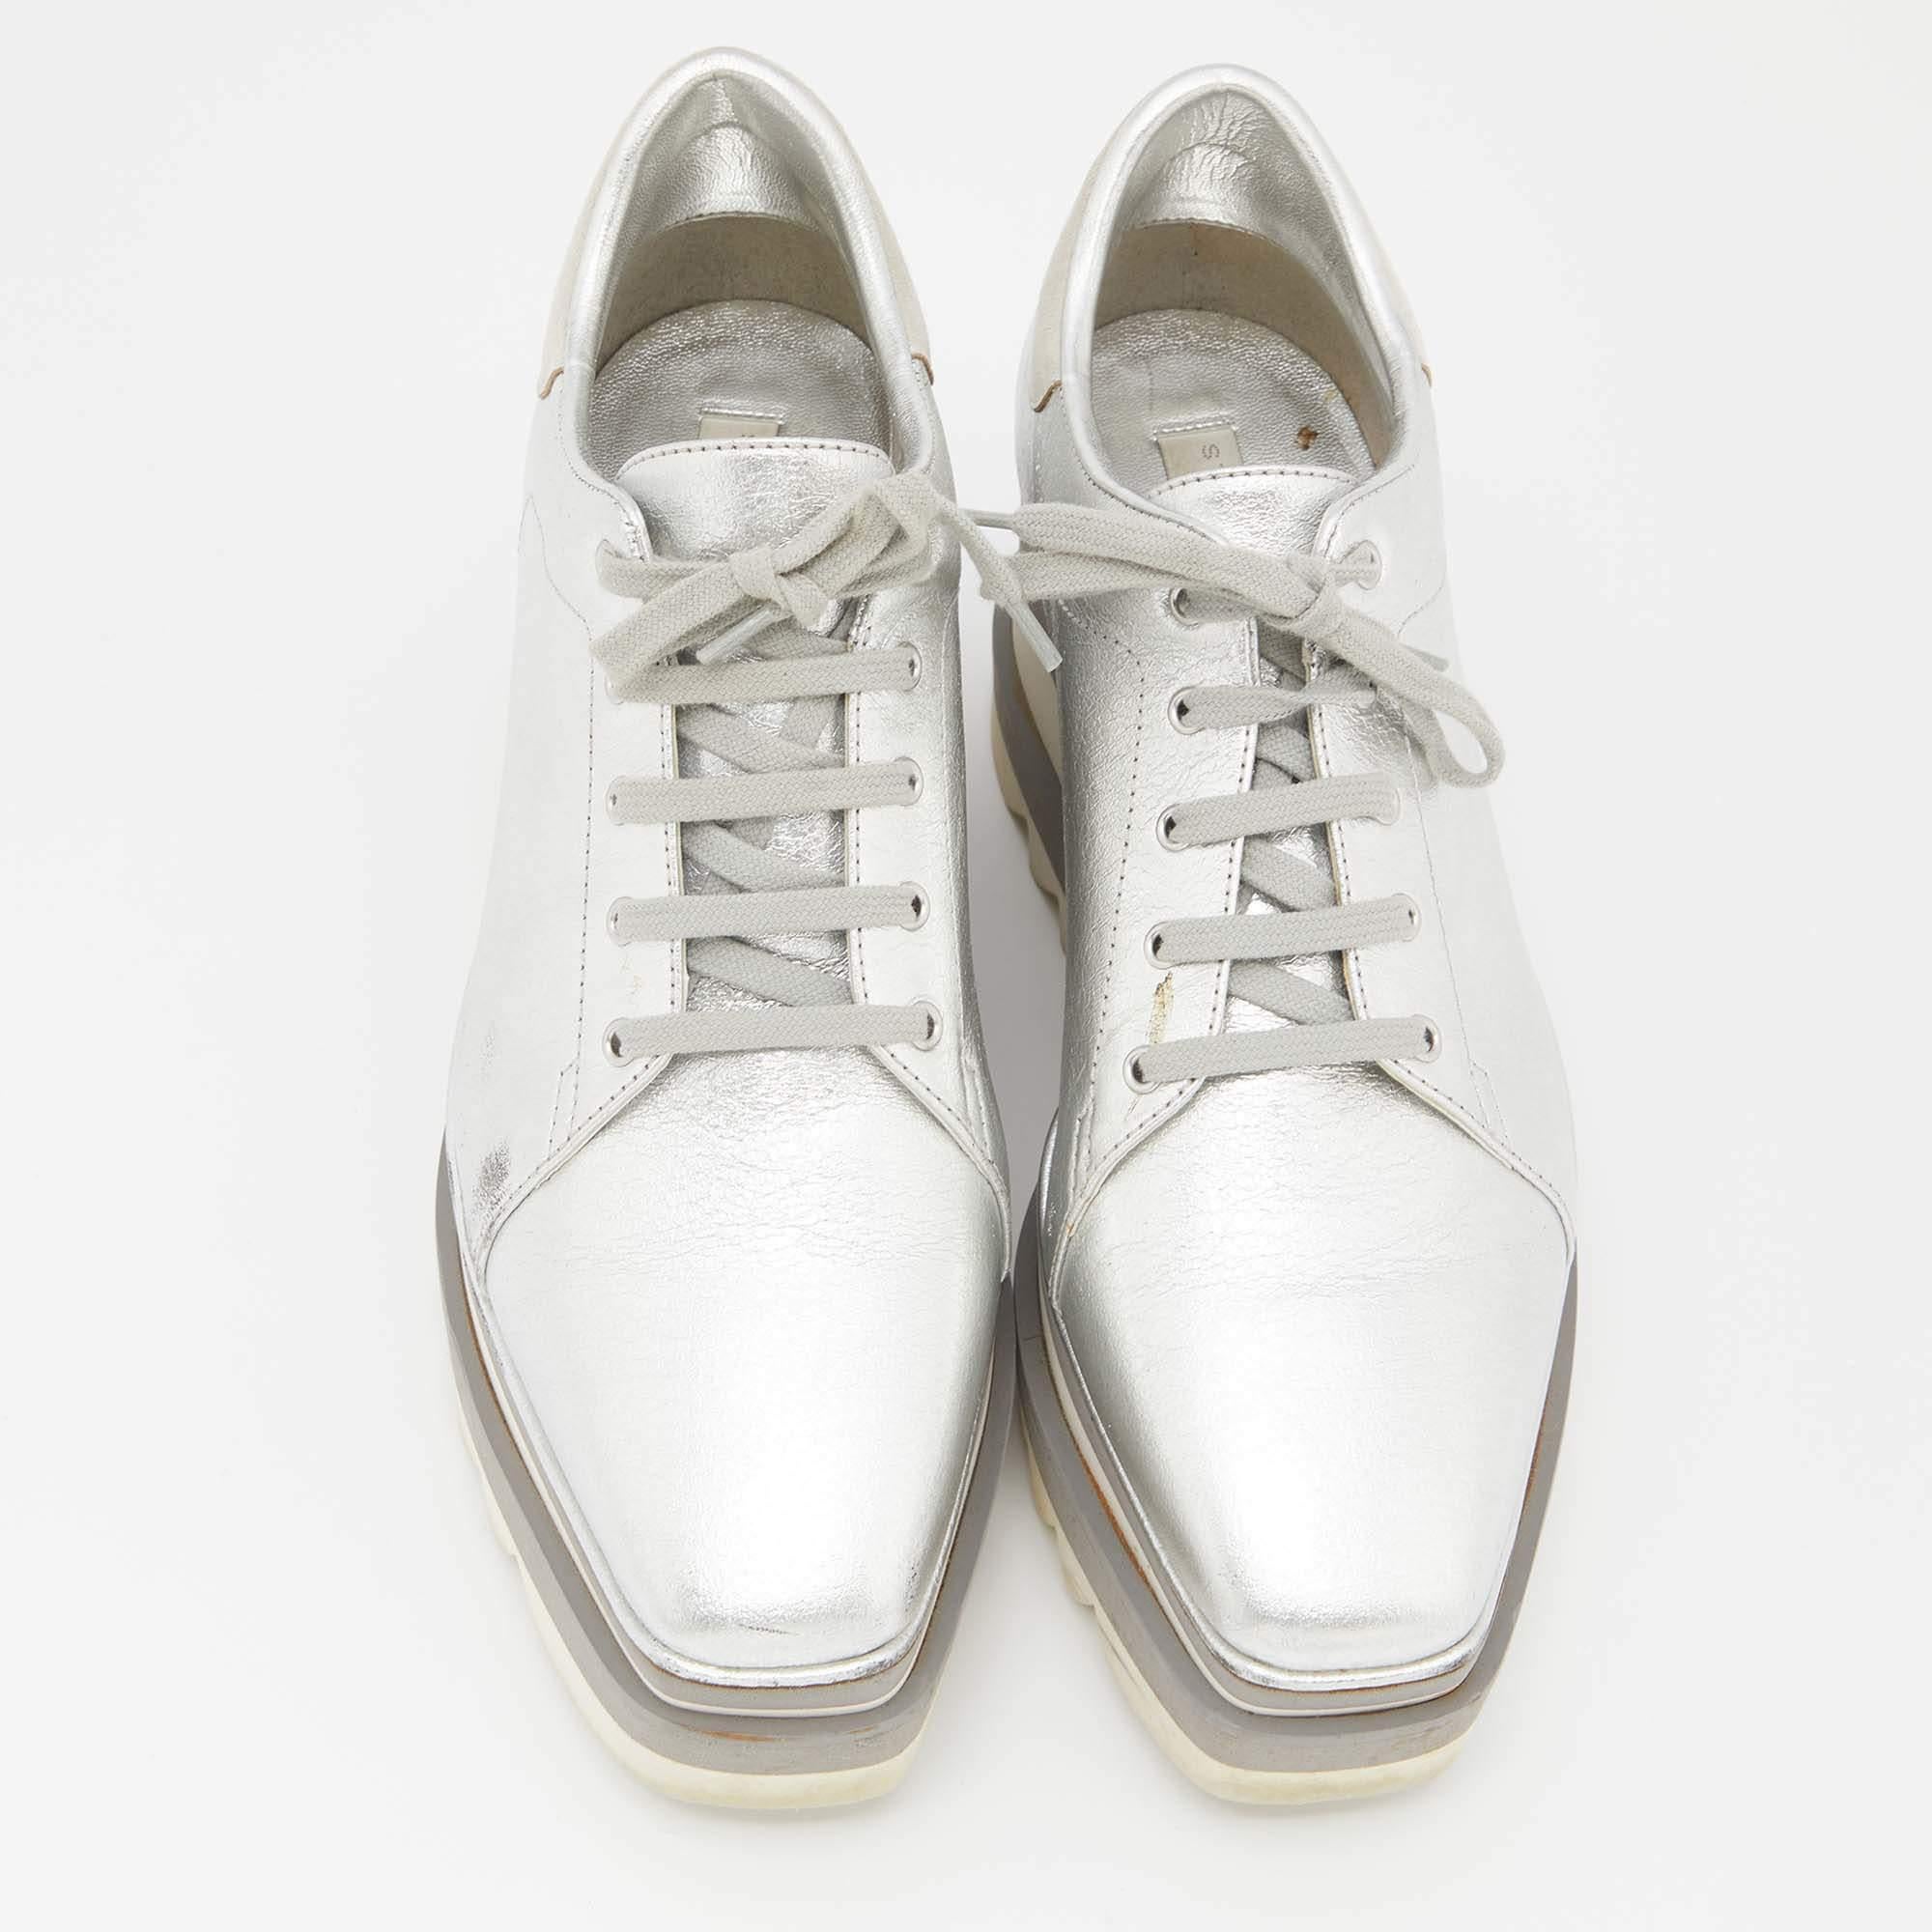 The striking silhouette of these Stella McCartney sneakers makes them highly fashionable. Constructed from faux leather & suede, they feature lace-up vamps, platforms, and rubber soles.

Includes: Original Dustbag